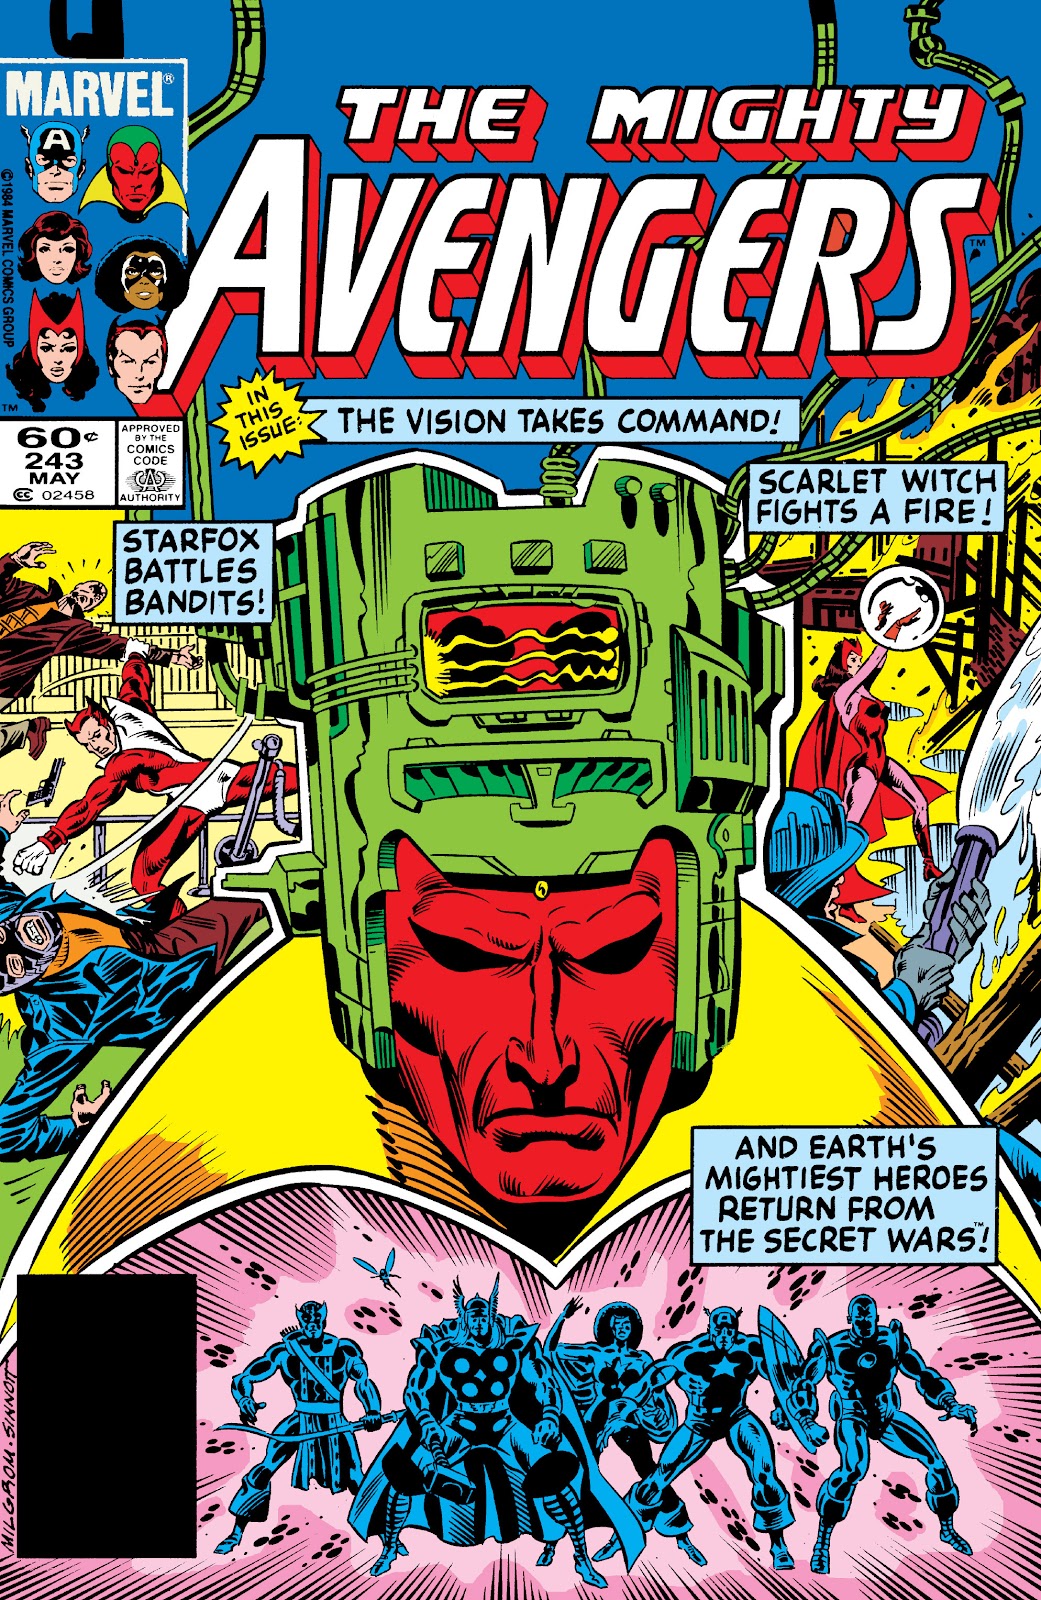 The Avengers (1963) issue 243 - Page 1